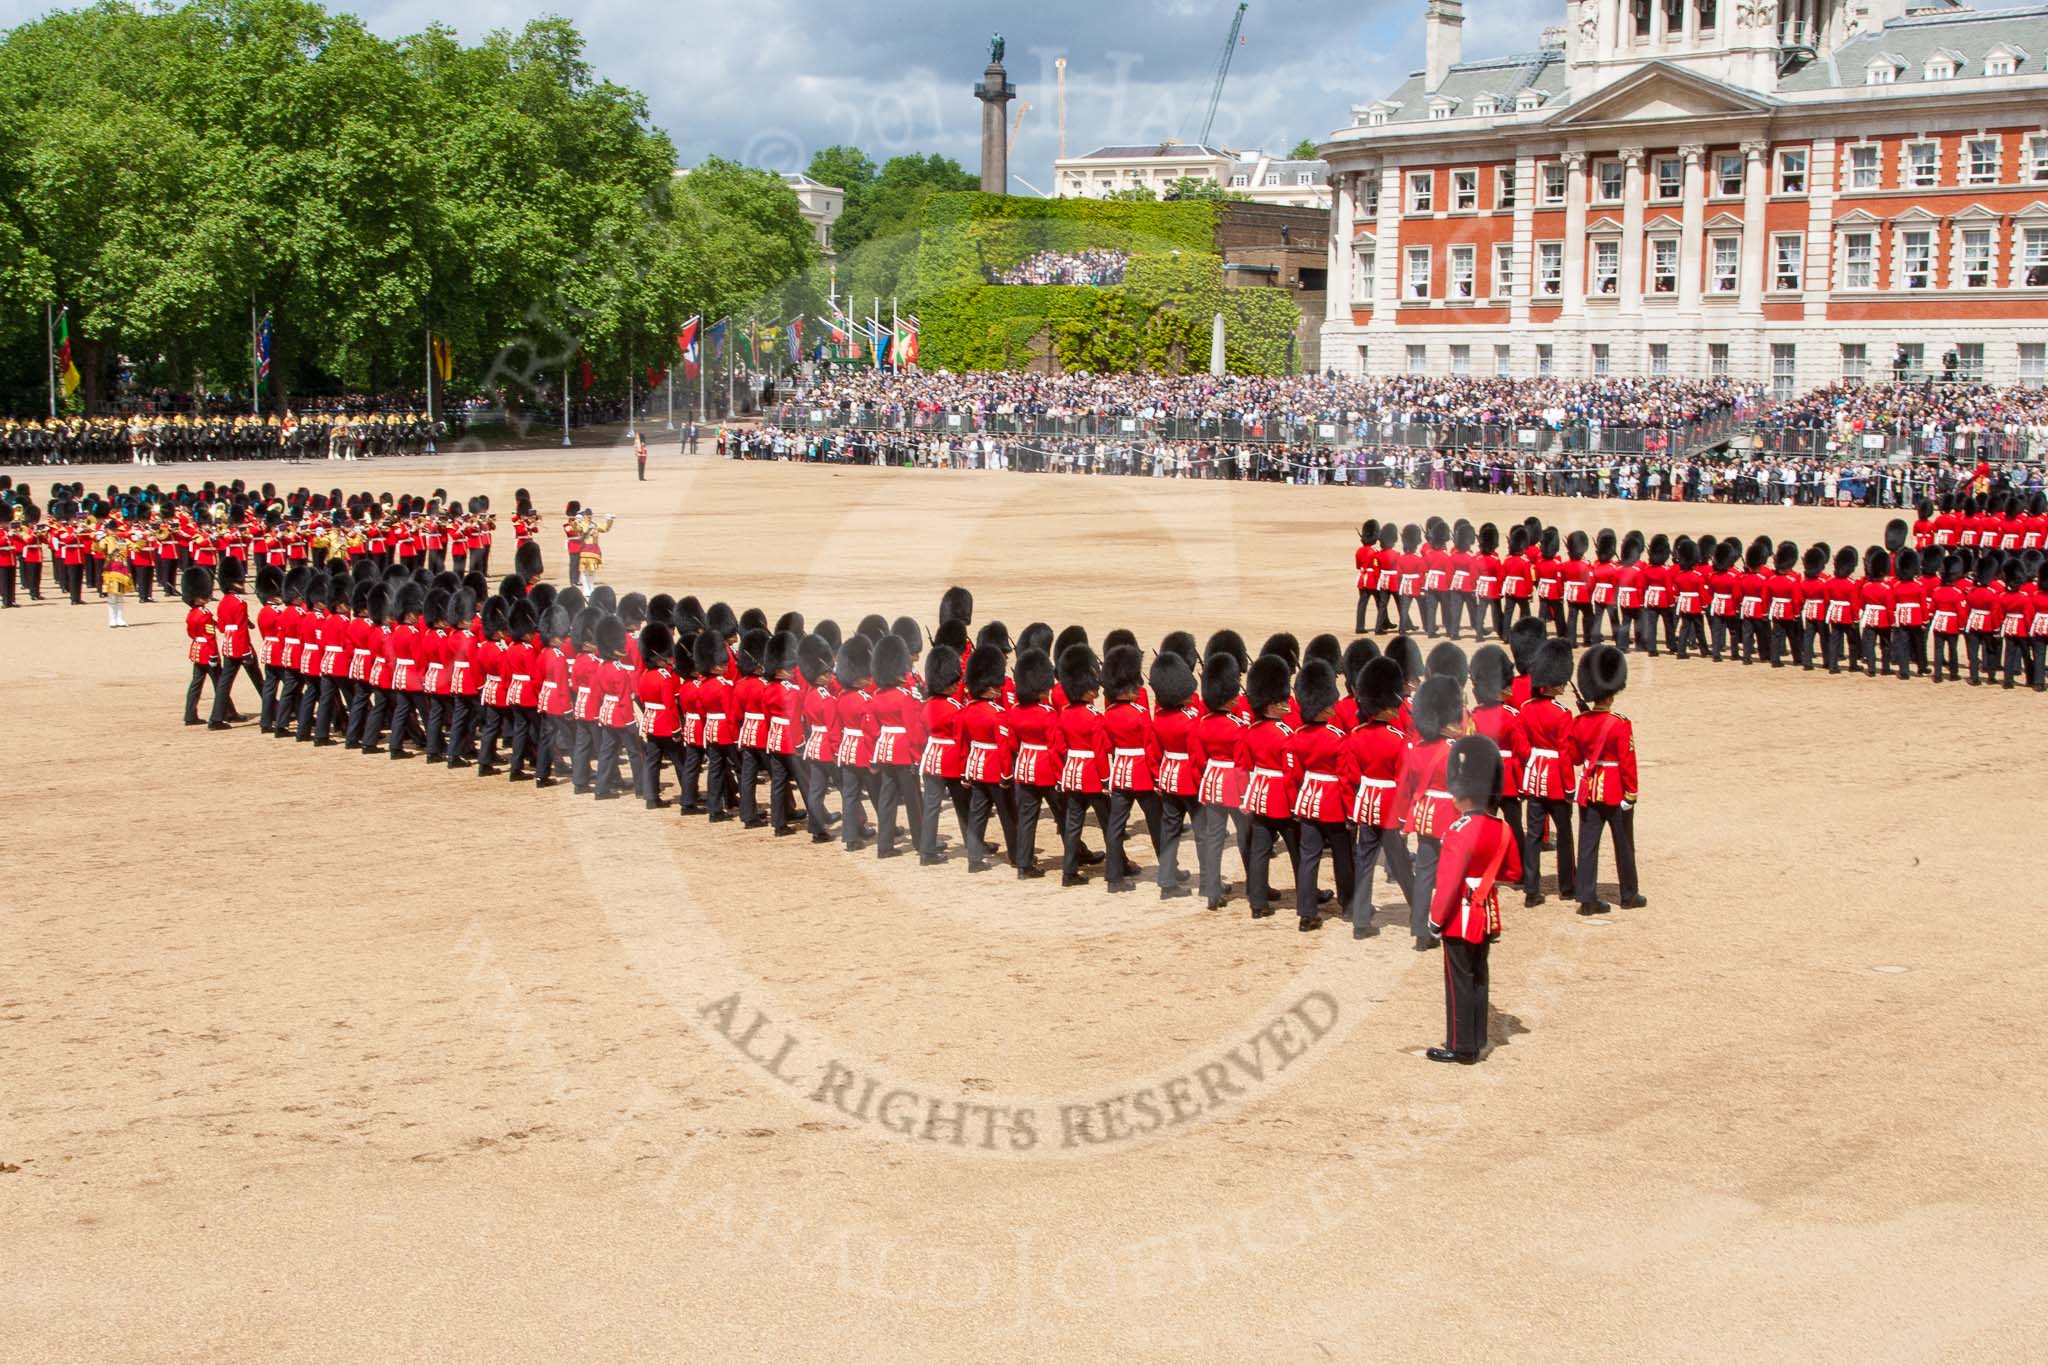 Trooping the Colour 2013: No. 5 Guard, F Company Scots Guards, during the March Past. Image #551, 15 June 2013 11:37 Horse Guards Parade, London, UK